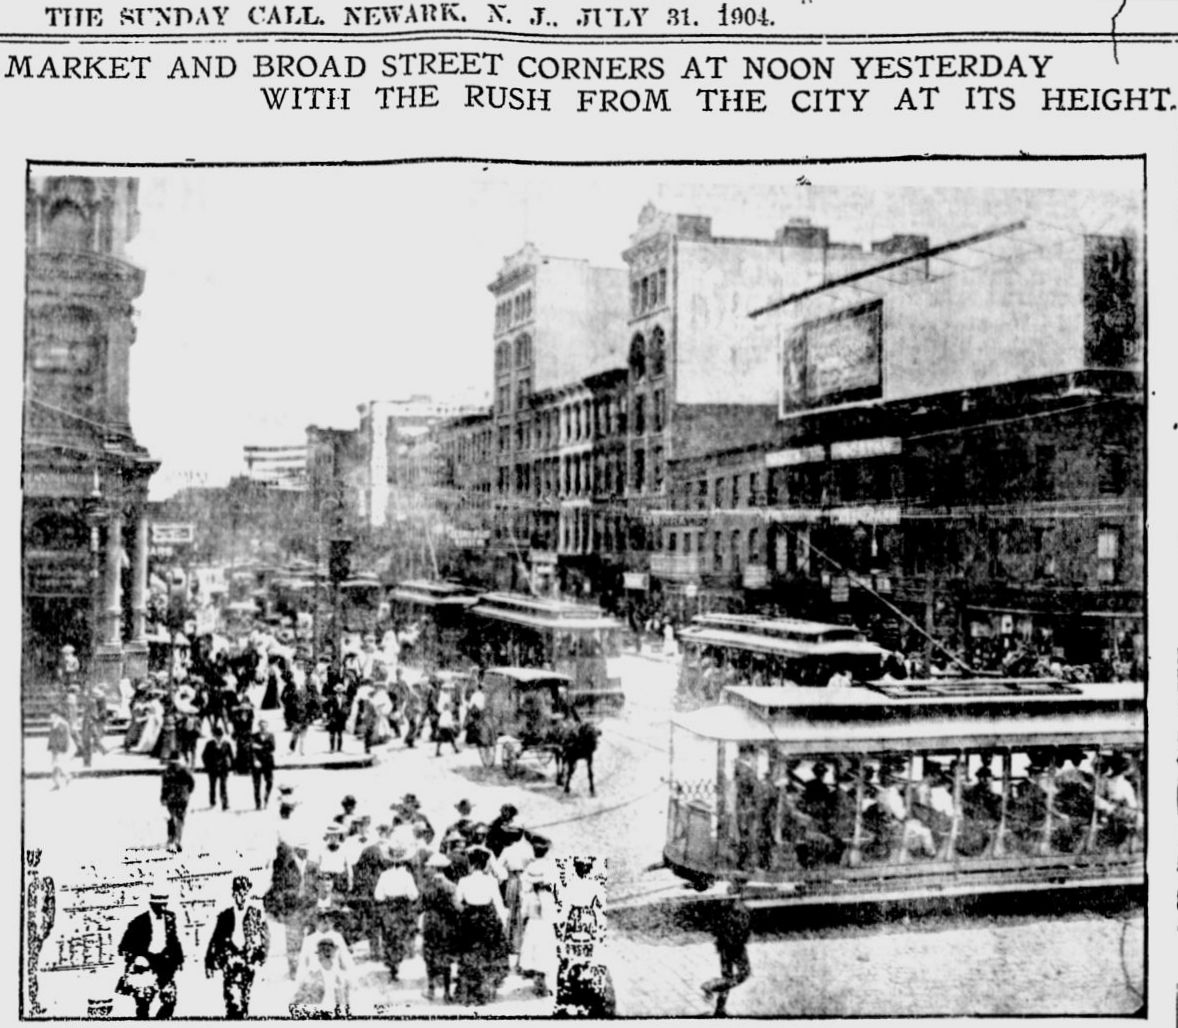 Market & Broad Street Corners at Noon Yesterday with the Rush from the City at Its Height.
July 31, 1904
